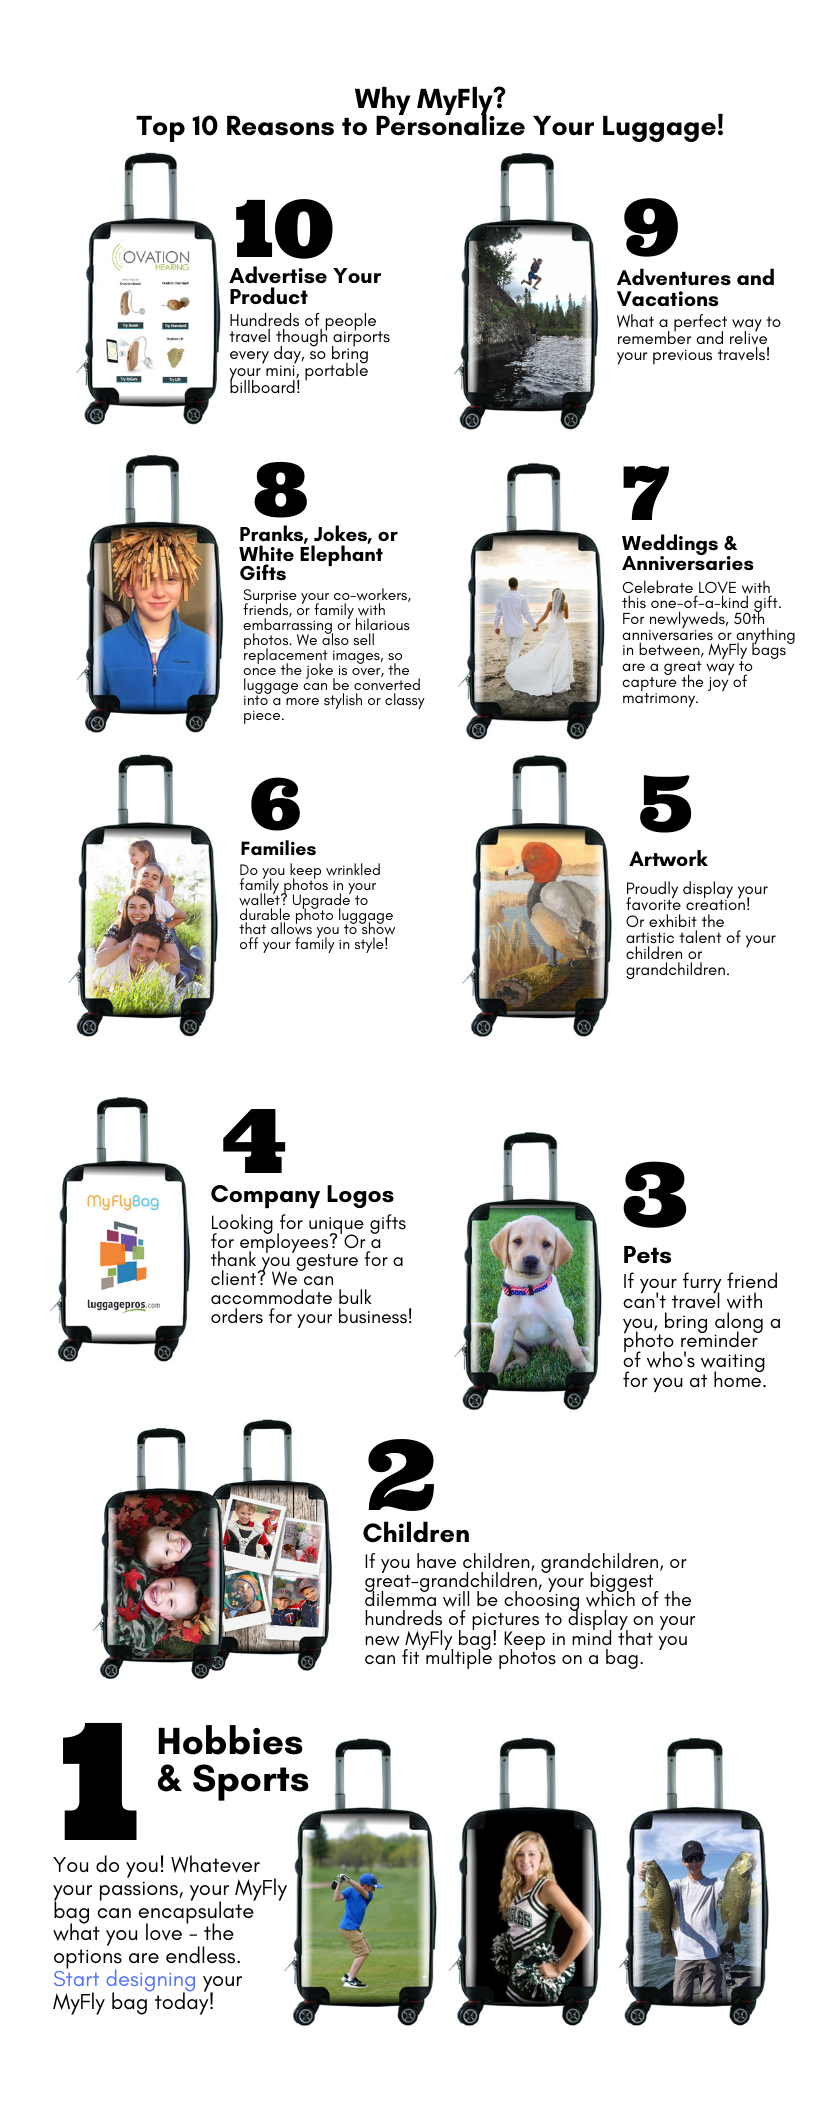 Top 10 Reasons to Personalize Your Luggage